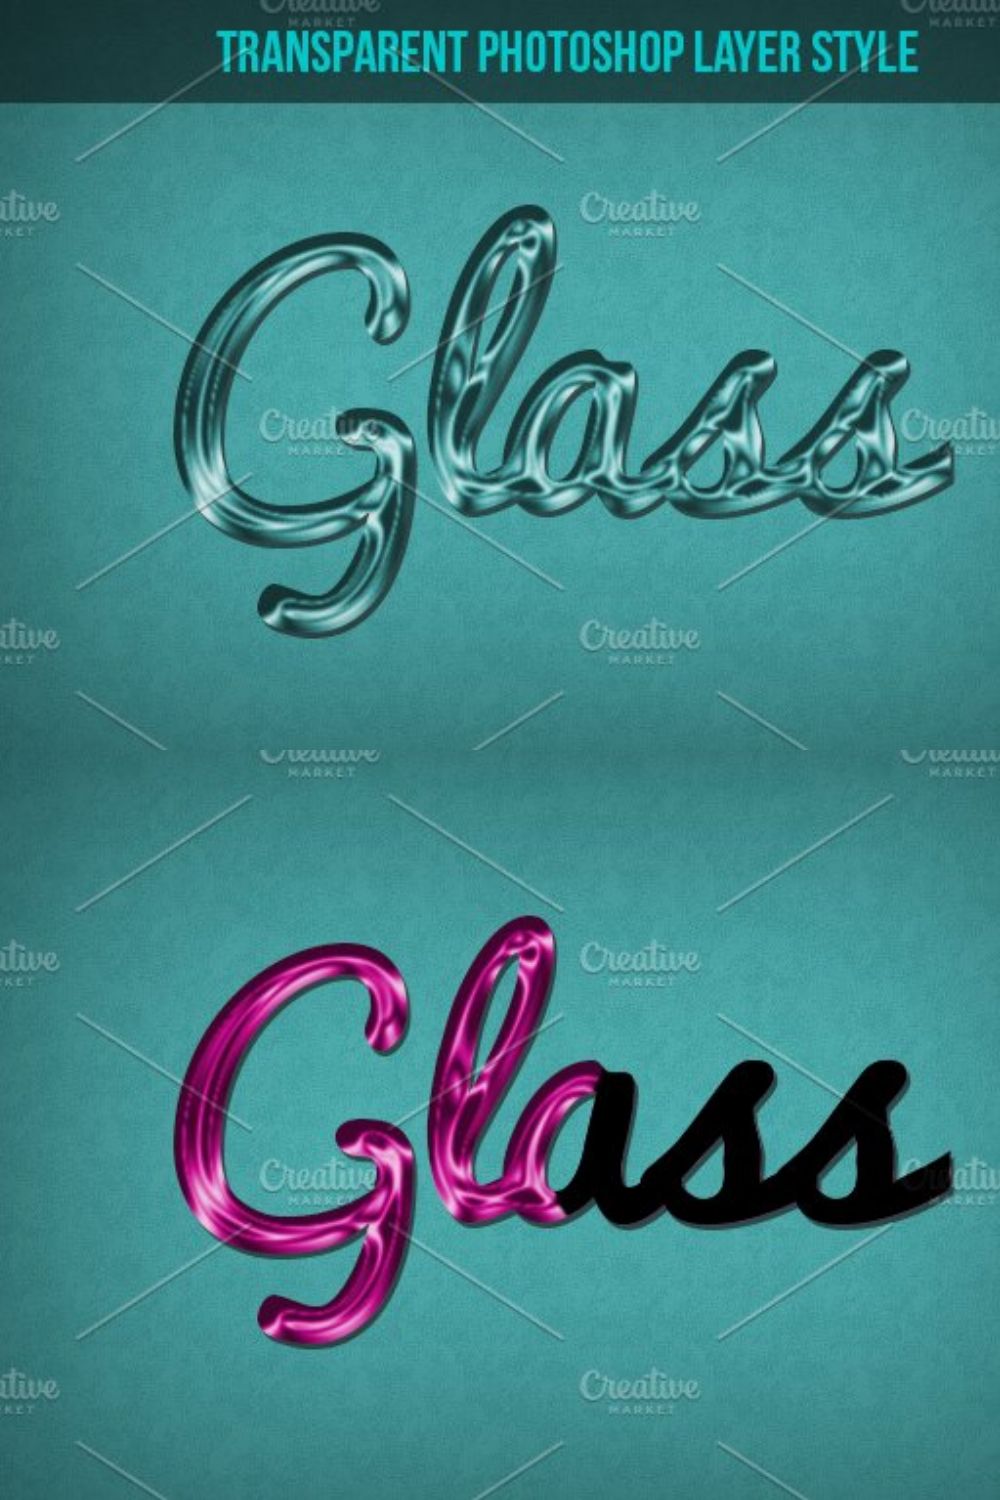 Glass Effect Photoshop Layer Style pinterest preview image.